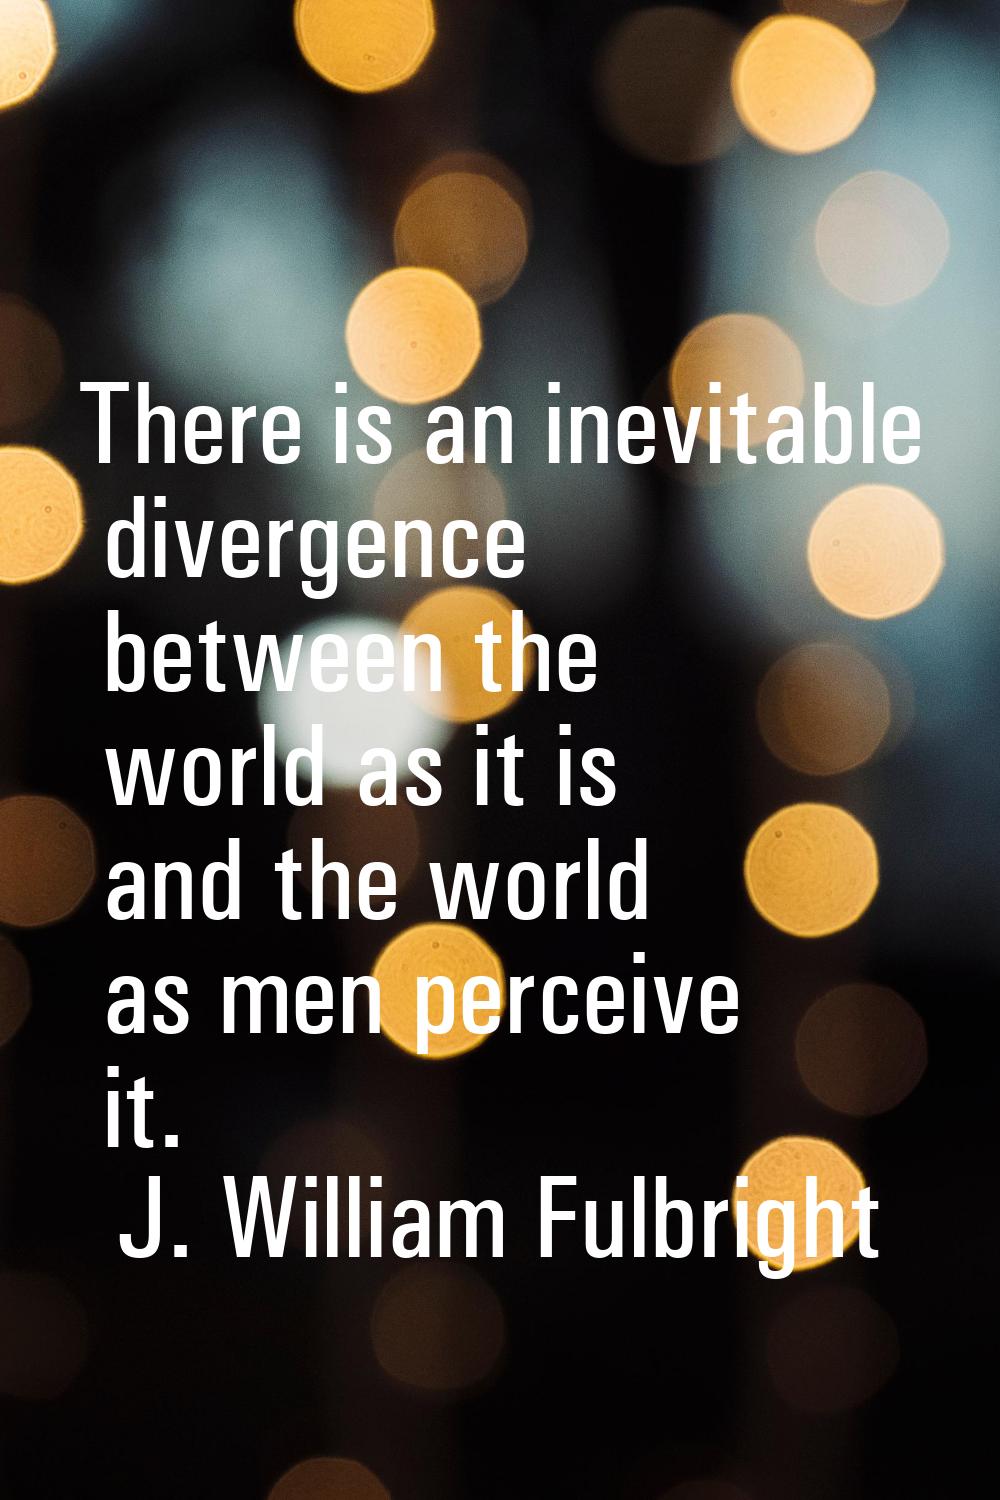 There is an inevitable divergence between the world as it is and the world as men perceive it.